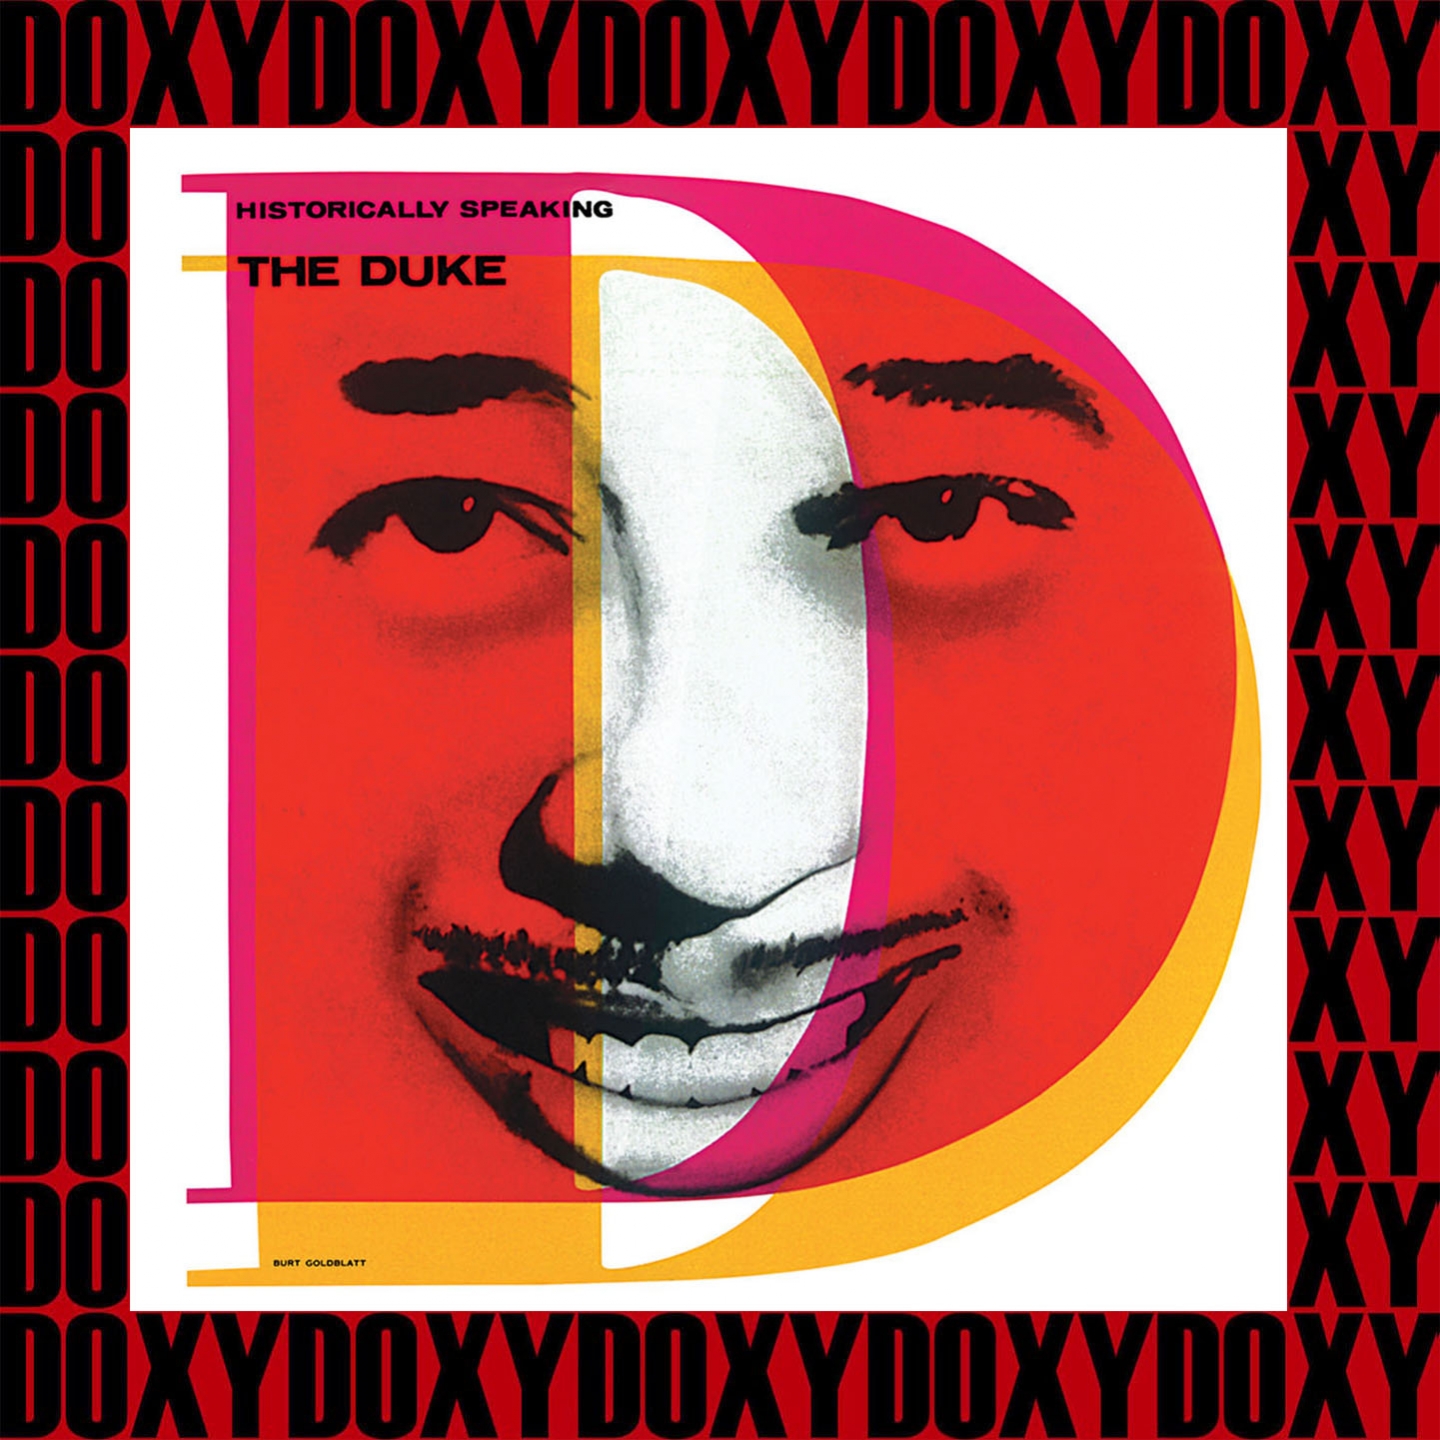 Historically Speaking, The Duke (Remastered Version) (Doxy Collection)